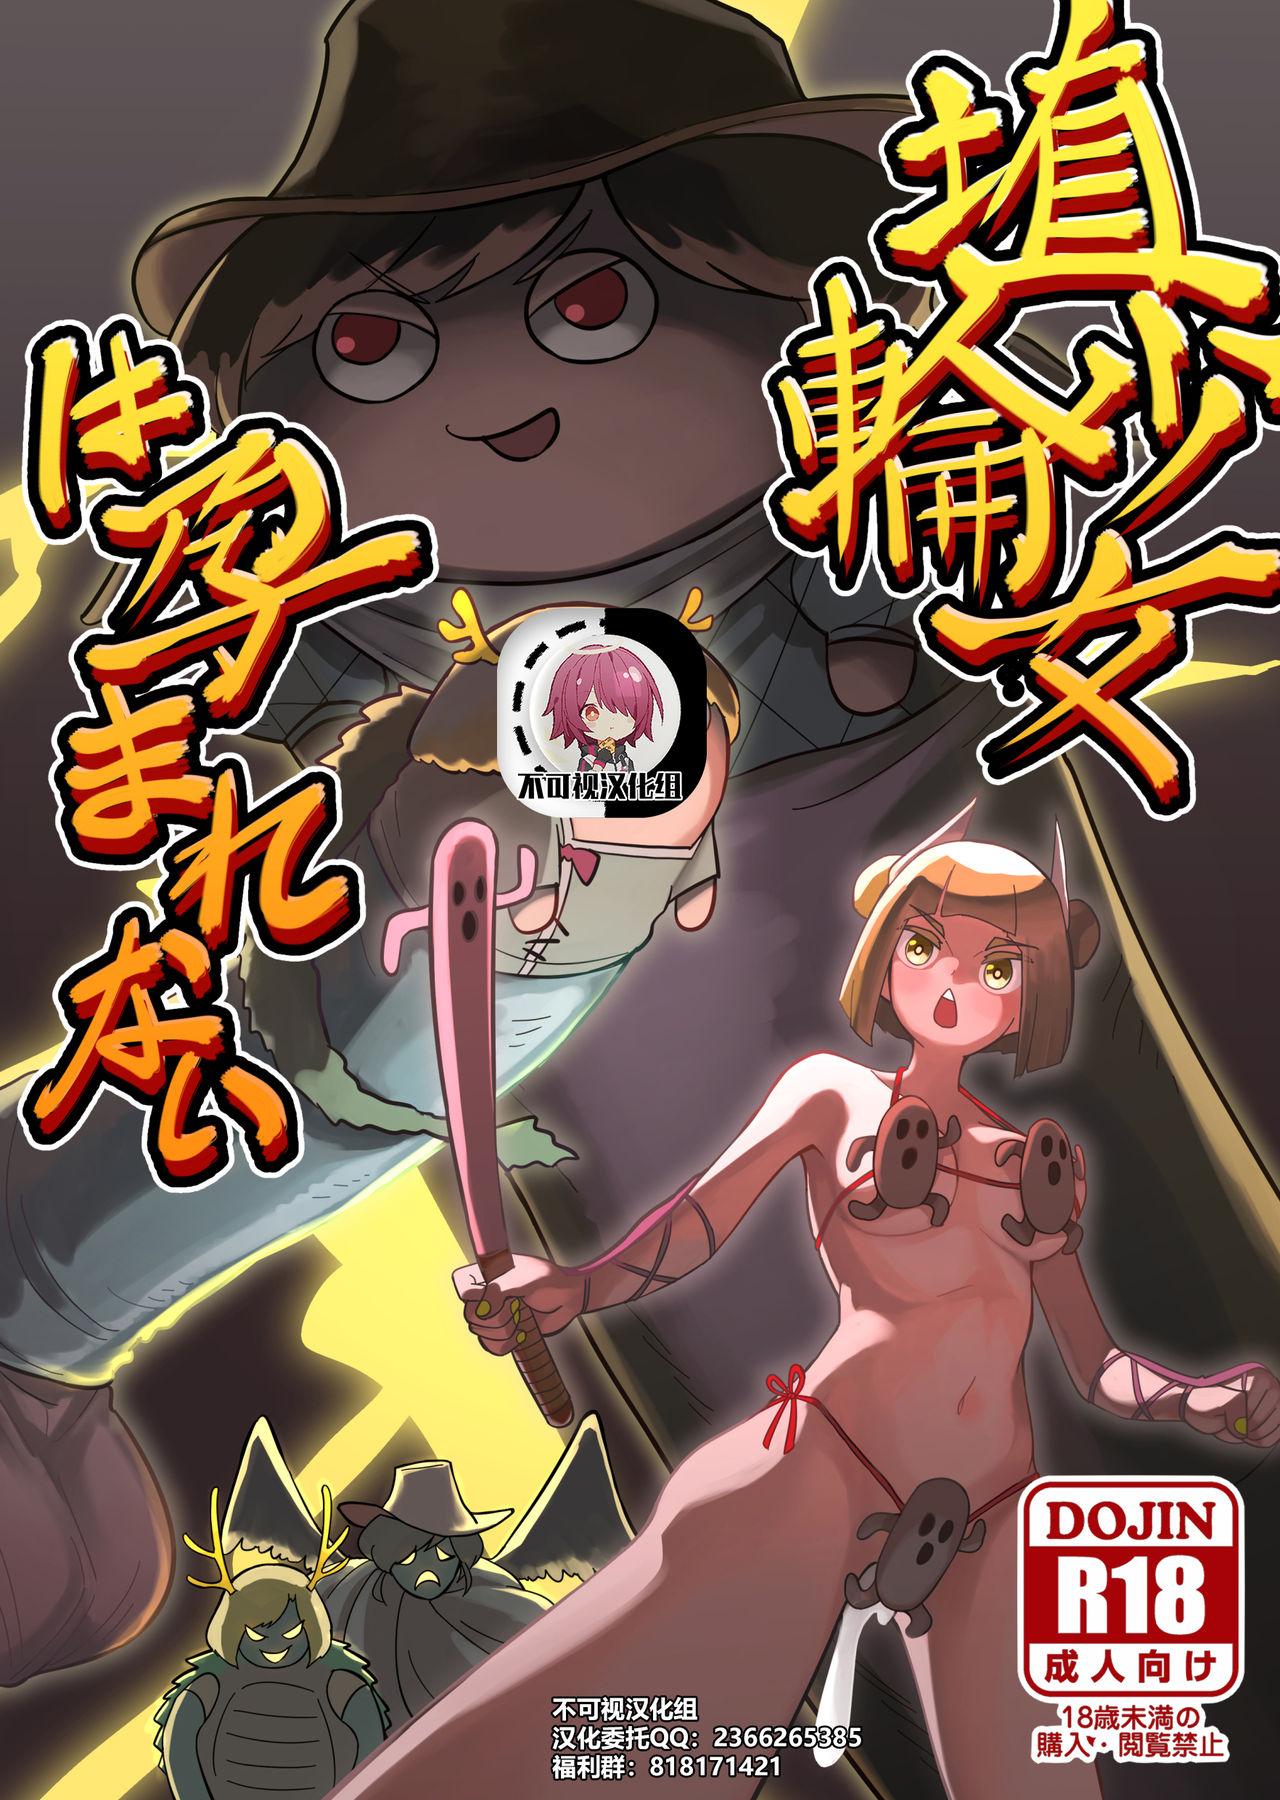 Free Rough Sex Porn [frogsnake] Haniwa shoujo wa haramarenai (Touhou Project) [Digital][Chinese]【不可视汉化】 - Touhou project Pussy Fingering - Picture 1